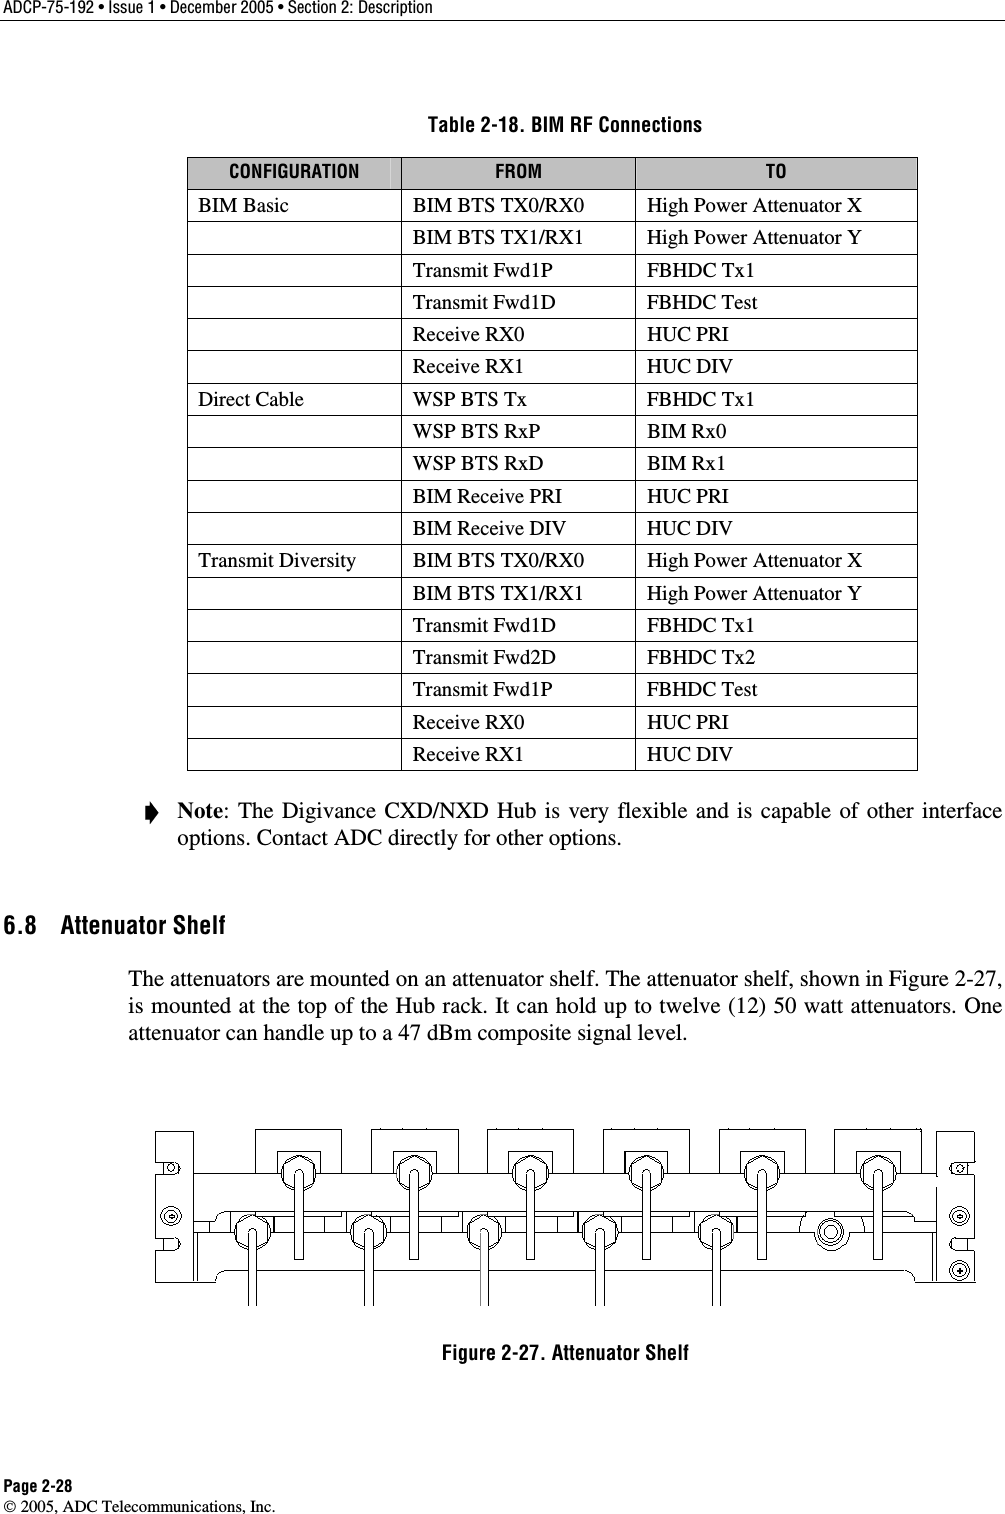 ADCP-75-192 • Issue 1 • December 2005 • Section 2: Description Page 2-28  2005, ADC Telecommunications, Inc. Table 2-18. BIM RF Connections CONFIGURATION  FROM  TO BIM Basic    BIM BTS TX0/RX0  High Power Attenuator X  BIM BTS TX1/RX1  High Power Attenuator Y  Transmit Fwd1P  FBHDC Tx1  Transmit Fwd1D  FBHDC Test  Receive RX0  HUC PRI  Receive RX1  HUC DIV Direct Cable  WSP BTS Tx  FBHDC Tx1  WSP BTS RxP  BIM Rx0   WSP BTS RxD  BIM Rx1   BIM Receive PRI  HUC PRI   BIM Receive DIV  HUC DIV Transmit Diversity  BIM BTS TX0/RX0  High Power Attenuator X   BIM BTS TX1/RX1  High Power Attenuator Y   Transmit Fwd1D  FBHDC Tx1   Transmit Fwd2D  FBHDC Tx2   Transmit Fwd1P  FBHDC Test  Receive RX0  HUC PRI   Receive RX1  HUC DIV     Note: The Digivance CXD/NXD Hub is very flexible and is capable of other interface options. Contact ADC directly for other options. 6.8  Attenuator Shelf  The attenuators are mounted on an attenuator shelf. The attenuator shelf, shown in Figure 2-27, is mounted at the top of the Hub rack. It can hold up to twelve (12) 50 watt attenuators. One attenuator can handle up to a 47 dBm composite signal level.   Figure 2-27. Attenuator Shelf 